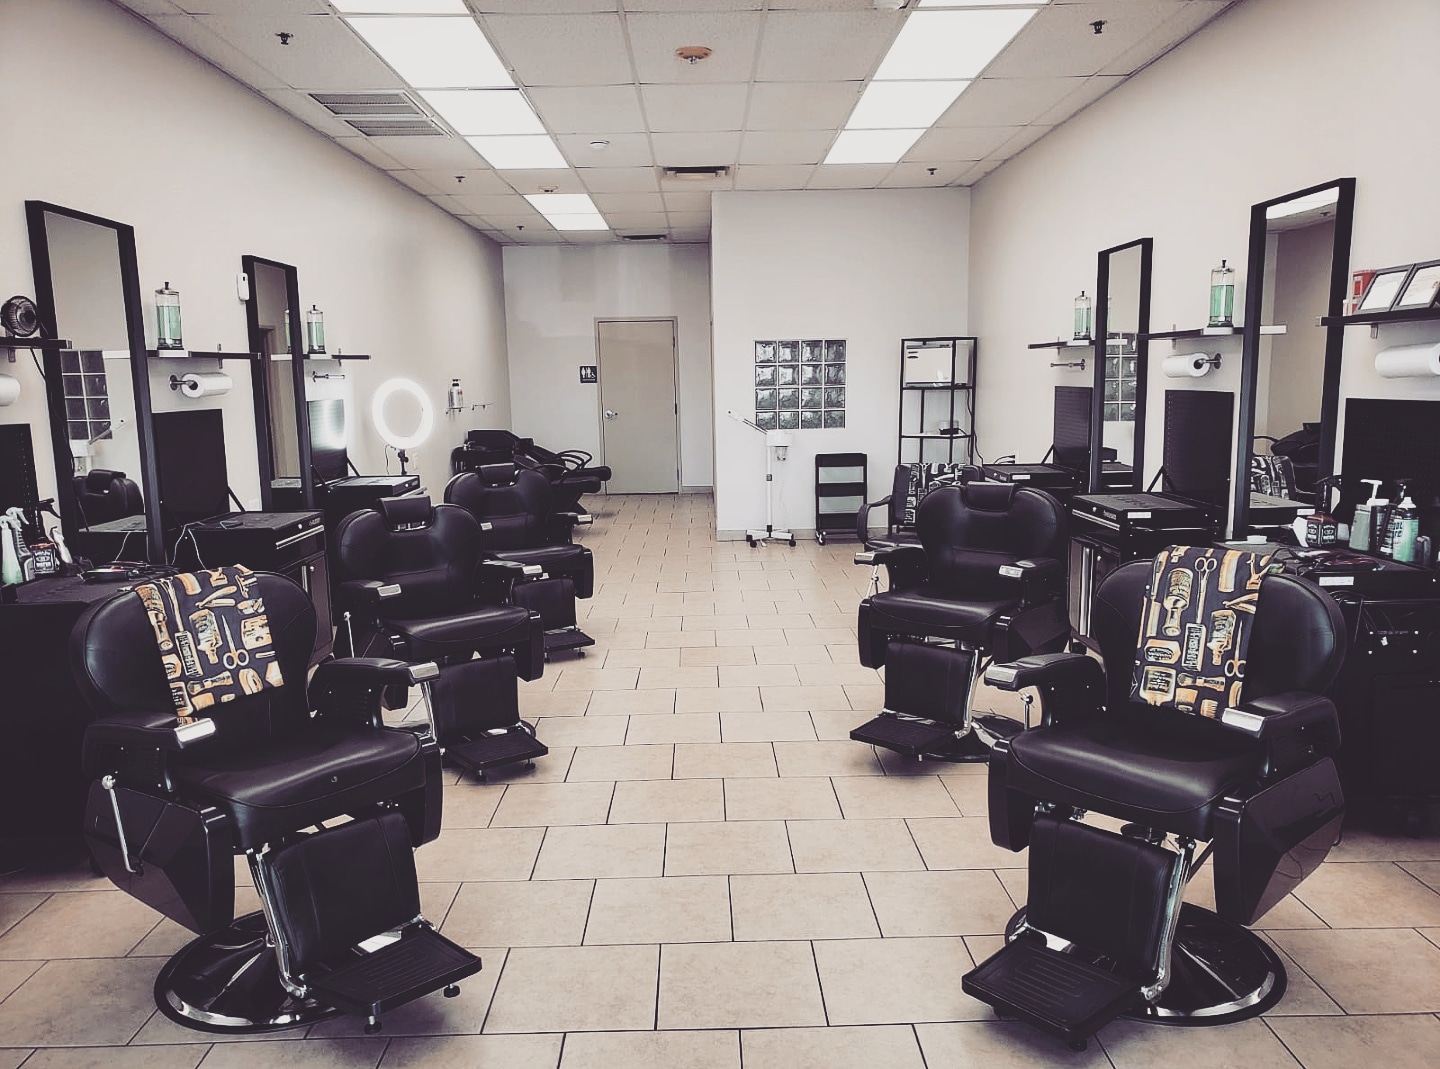 X-clusive Barber and Salon (by appointment only)